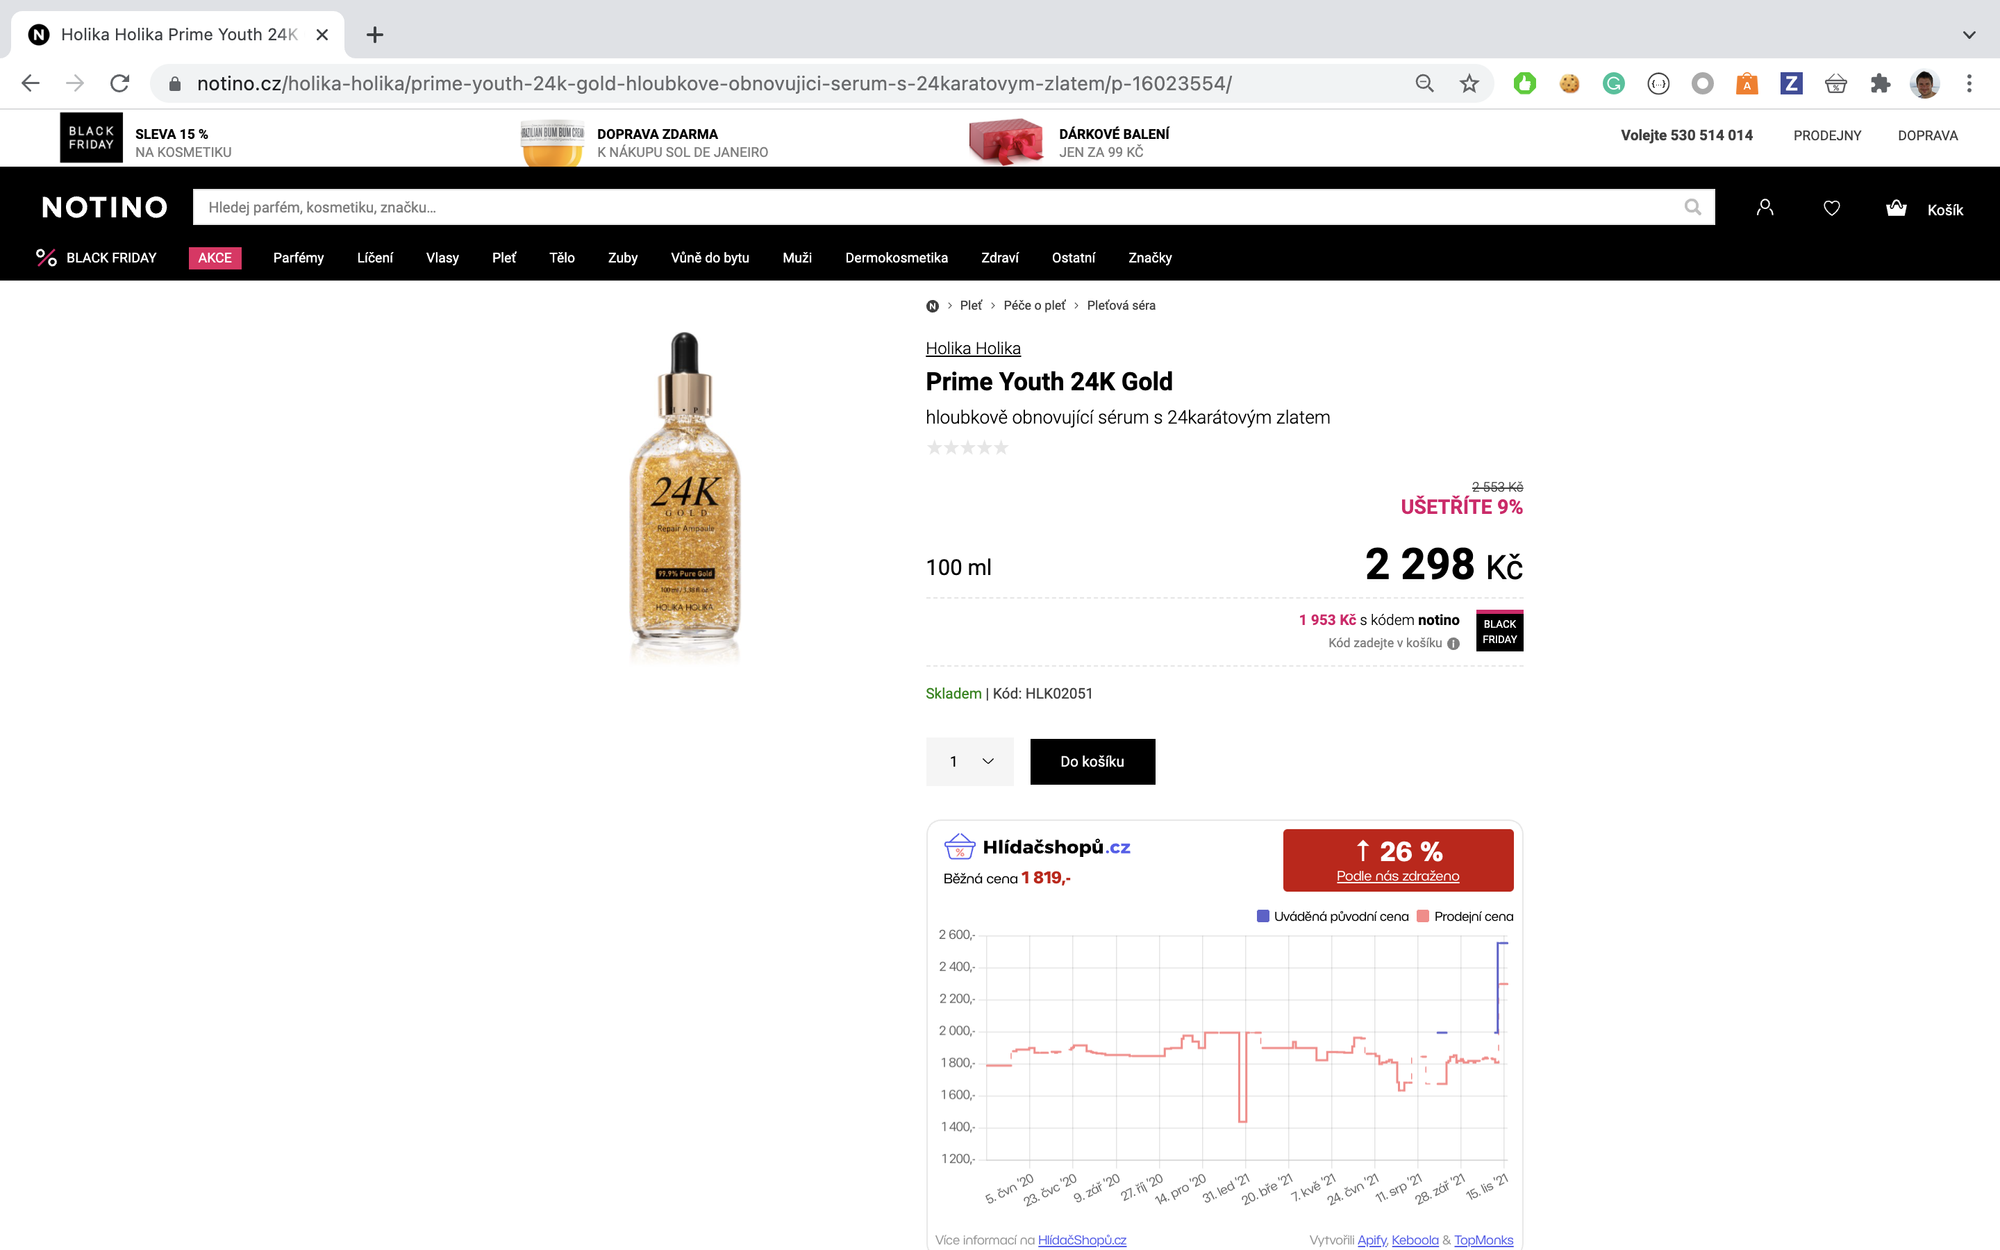 screenshot of a face serum on sale at notino.cz from 2,553 CZK to 2,298 CZK